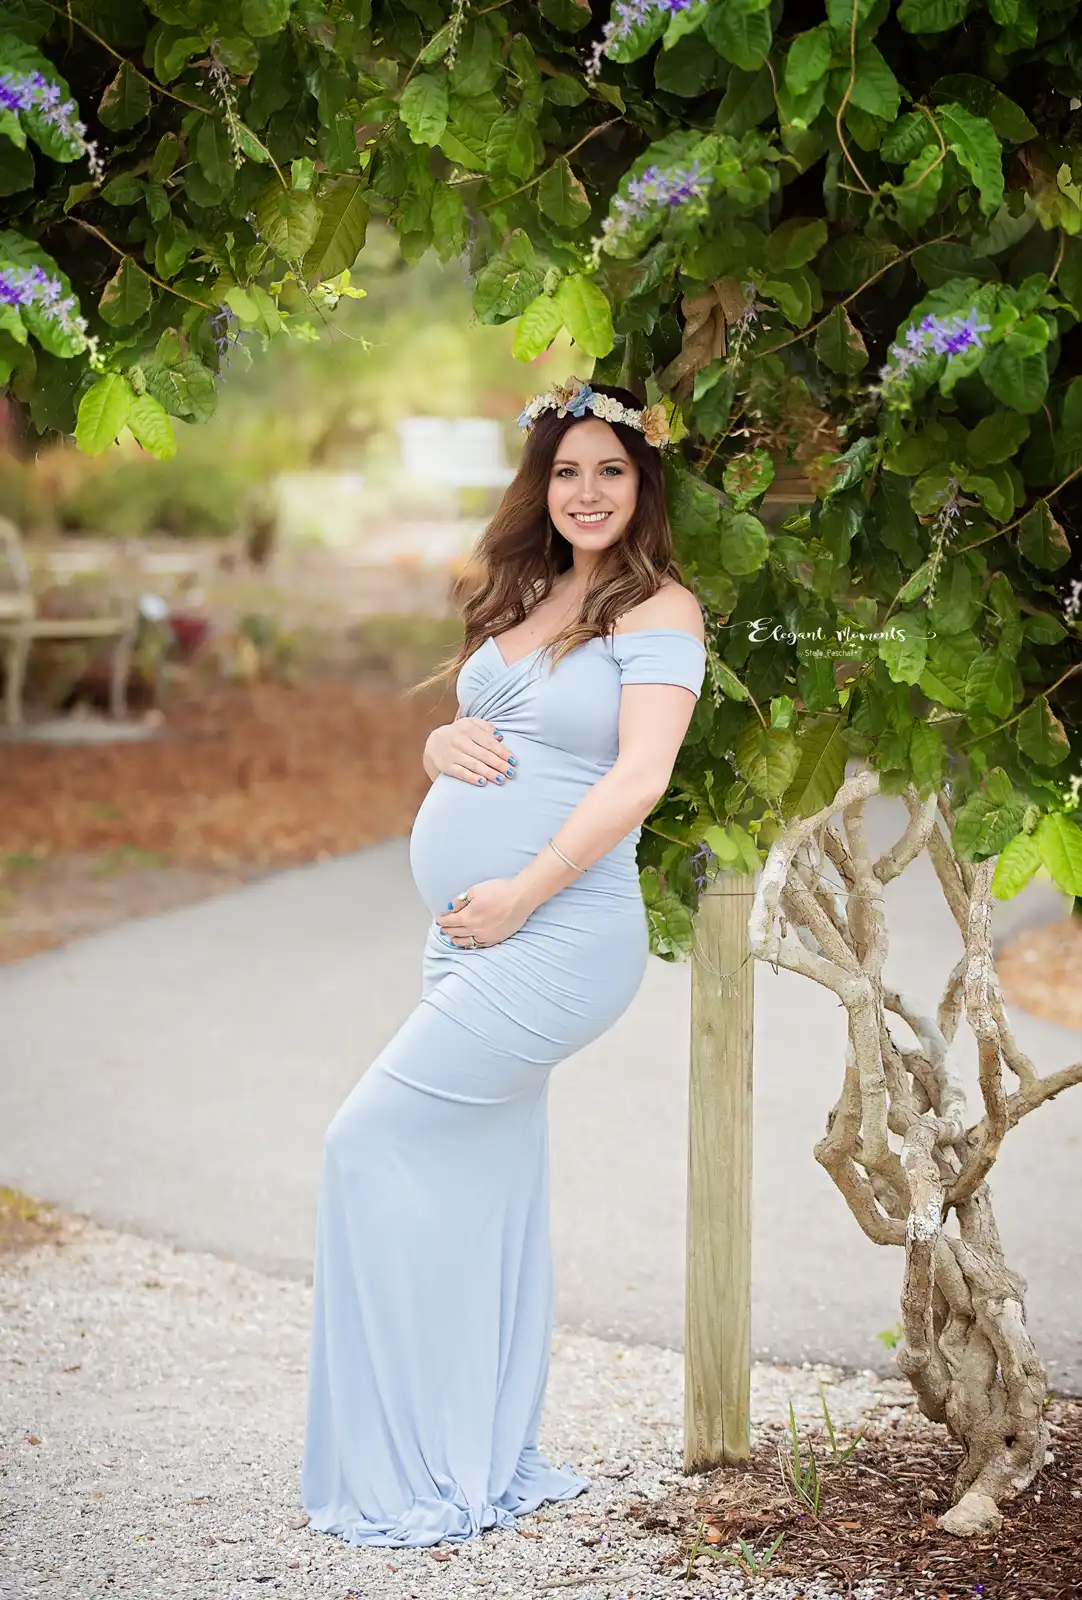 Fall Maternity Photos: Outfits, Poses and Priceless Tips - Localgrapher